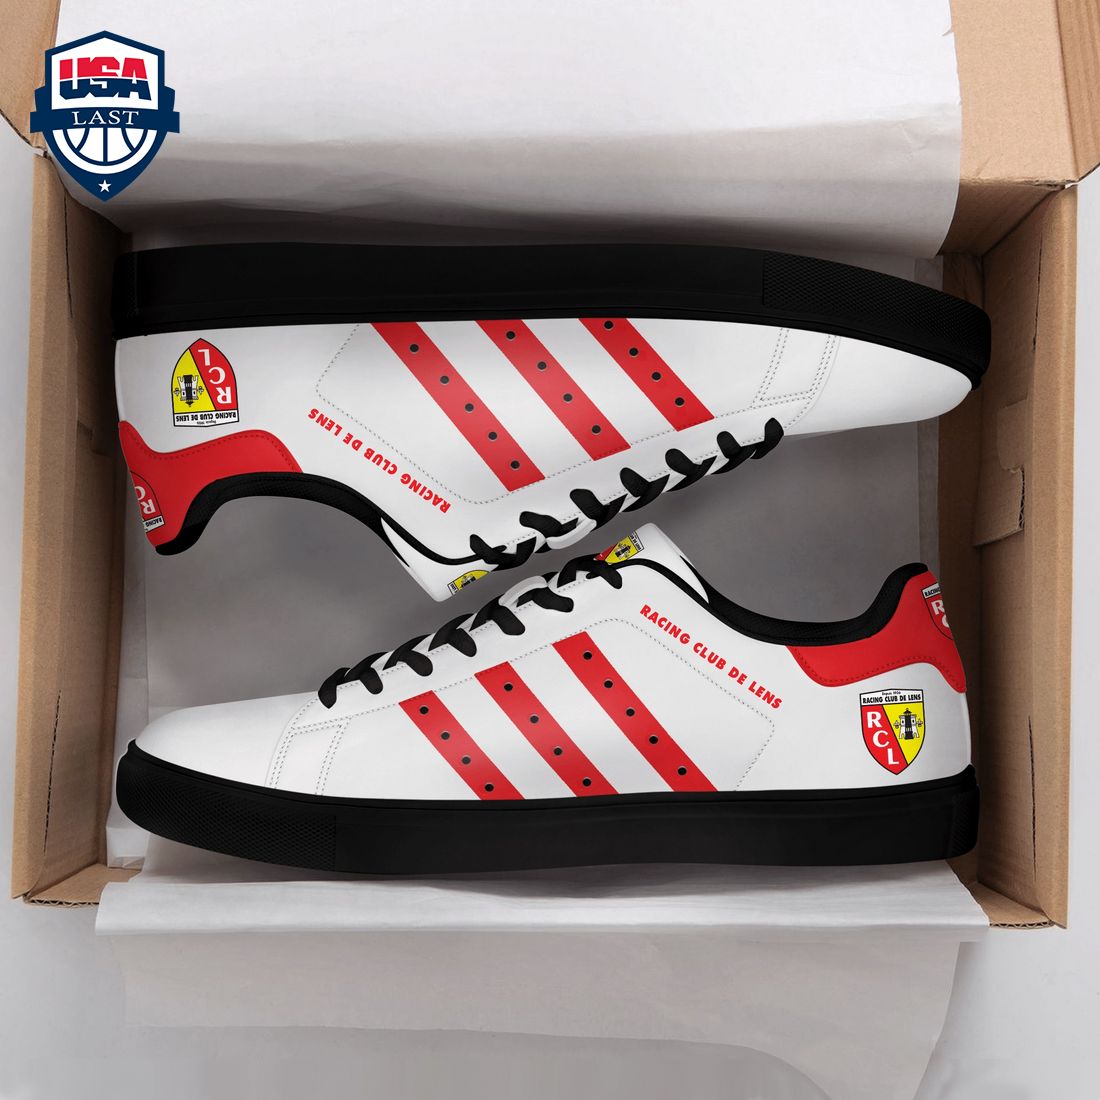 racing-club-de-lens-red-stripes-style-1-stan-smith-low-top-shoes-1-BZsAx.jpg